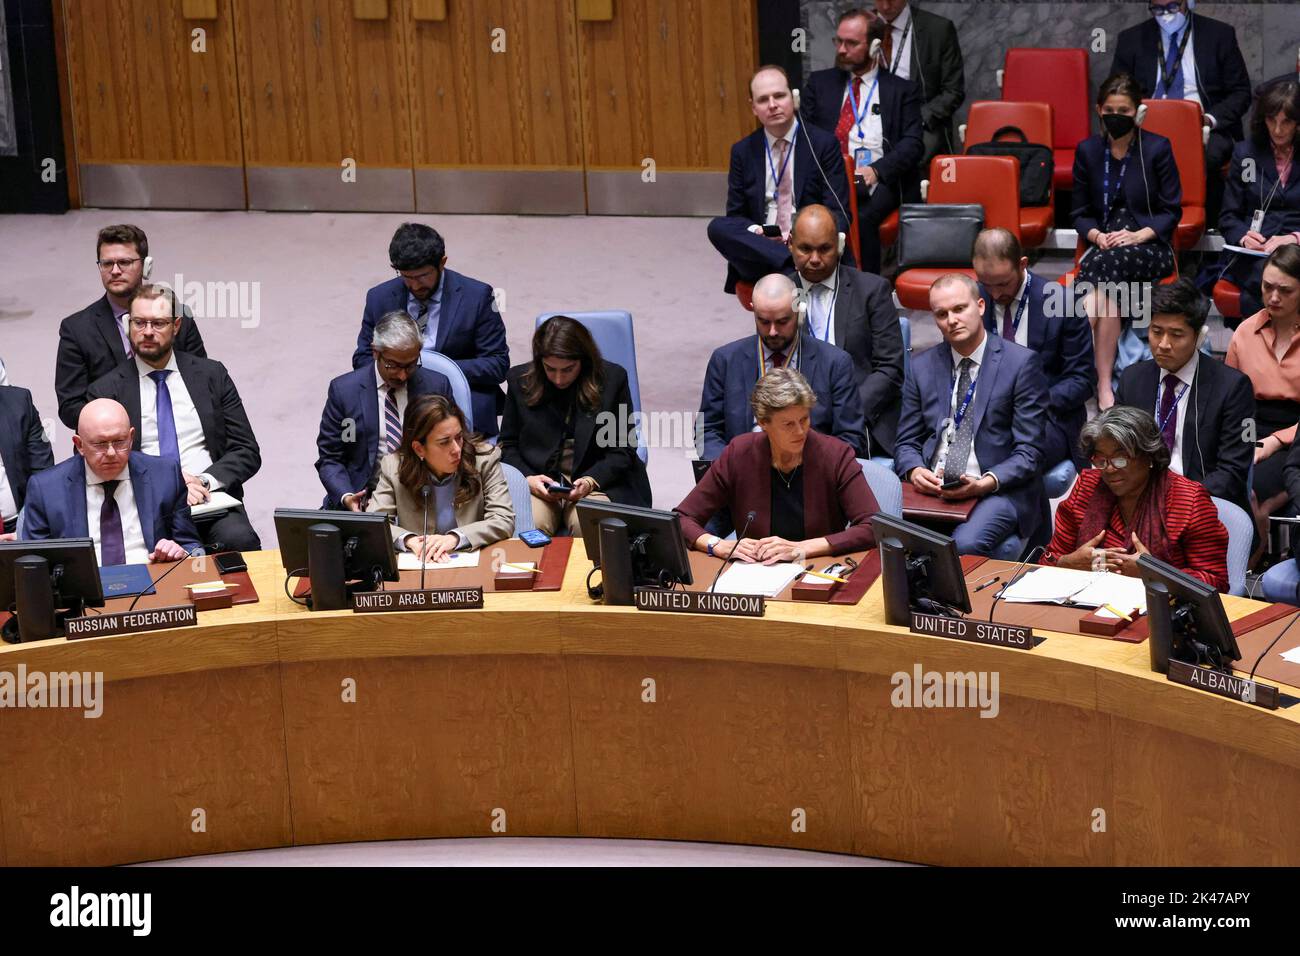 U.S. Ambassador to the United Nations Linda Thomas-Greenfield speaks as members of the United Nations Security Council convene at the request of Russia to discuss damage to two Russian gas pipelines to Europe, in New York, U.S., September 30, 2022. REUTERS/Andrew Kelly Stock Photo